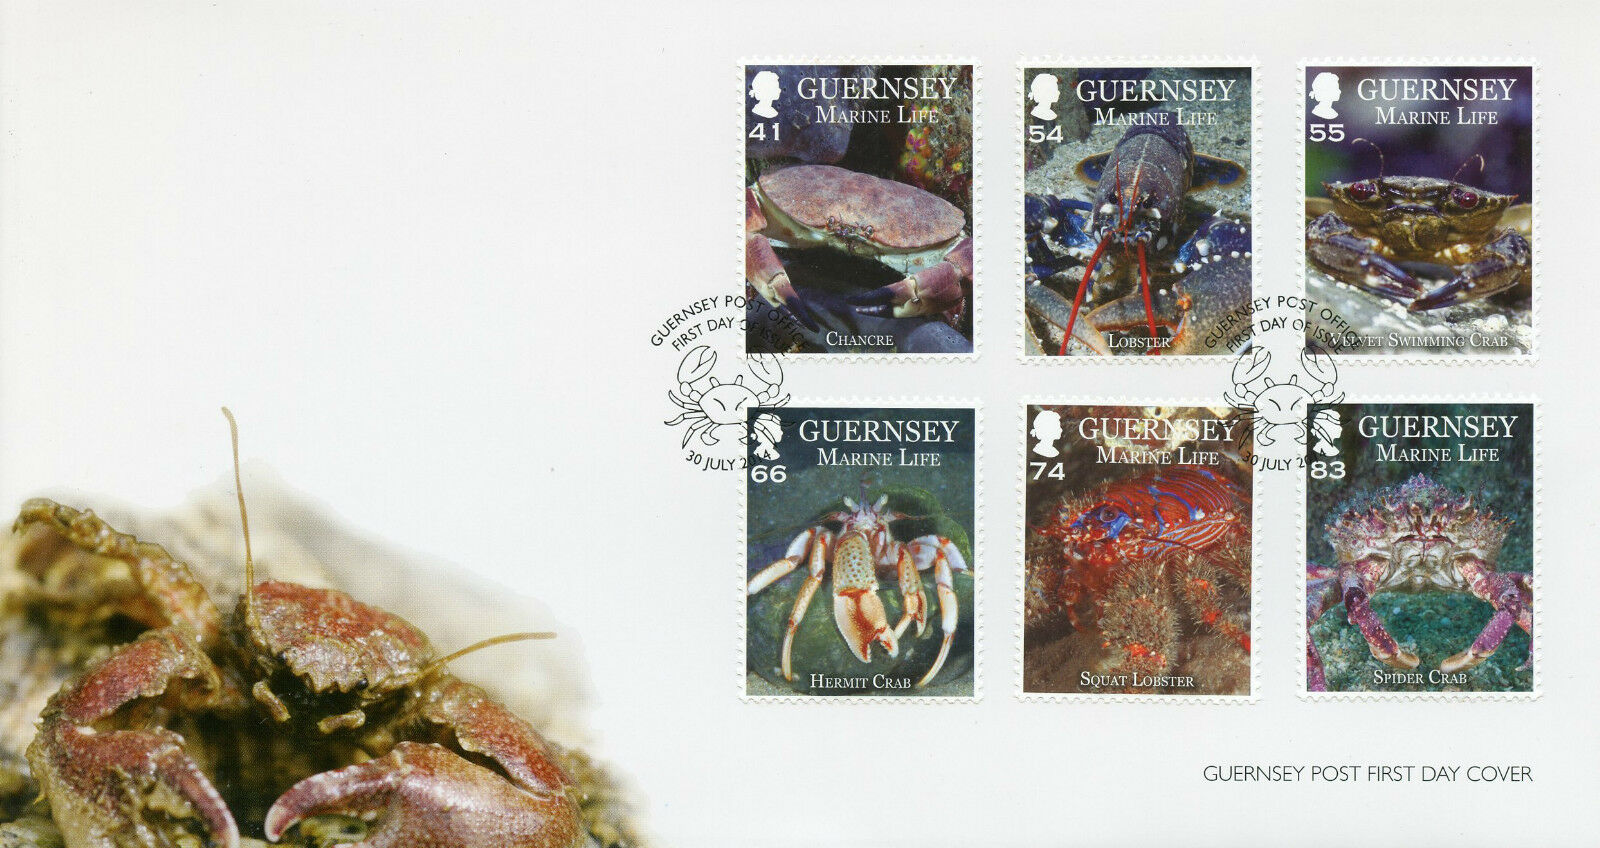 Guernsey 2014 FDC Marine Life II Crustaceans 6v Set Cover Chancre Lobster Crab